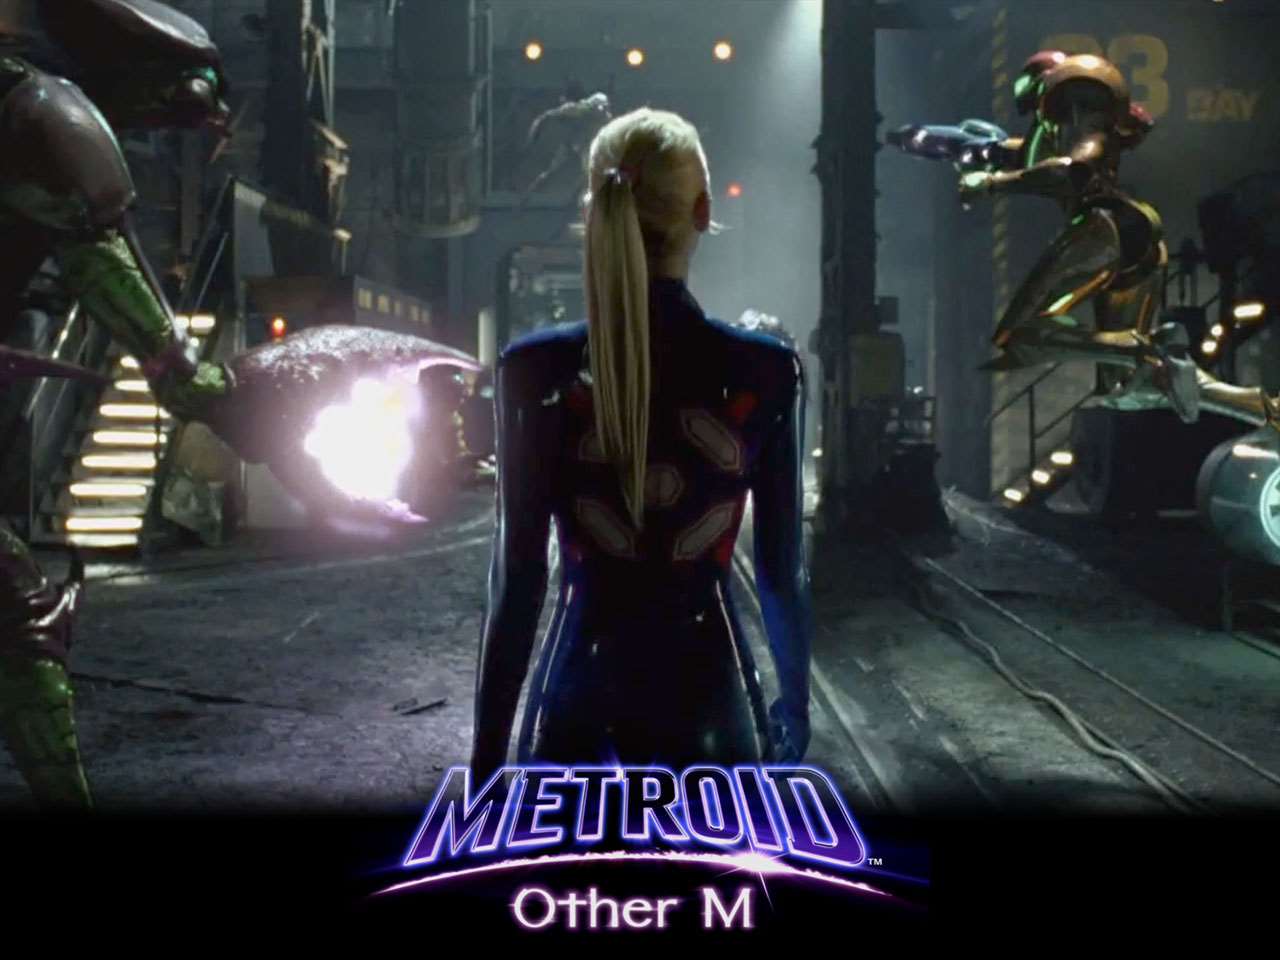 Metroid: Other M Wallpaper 3 (1280 x 960)